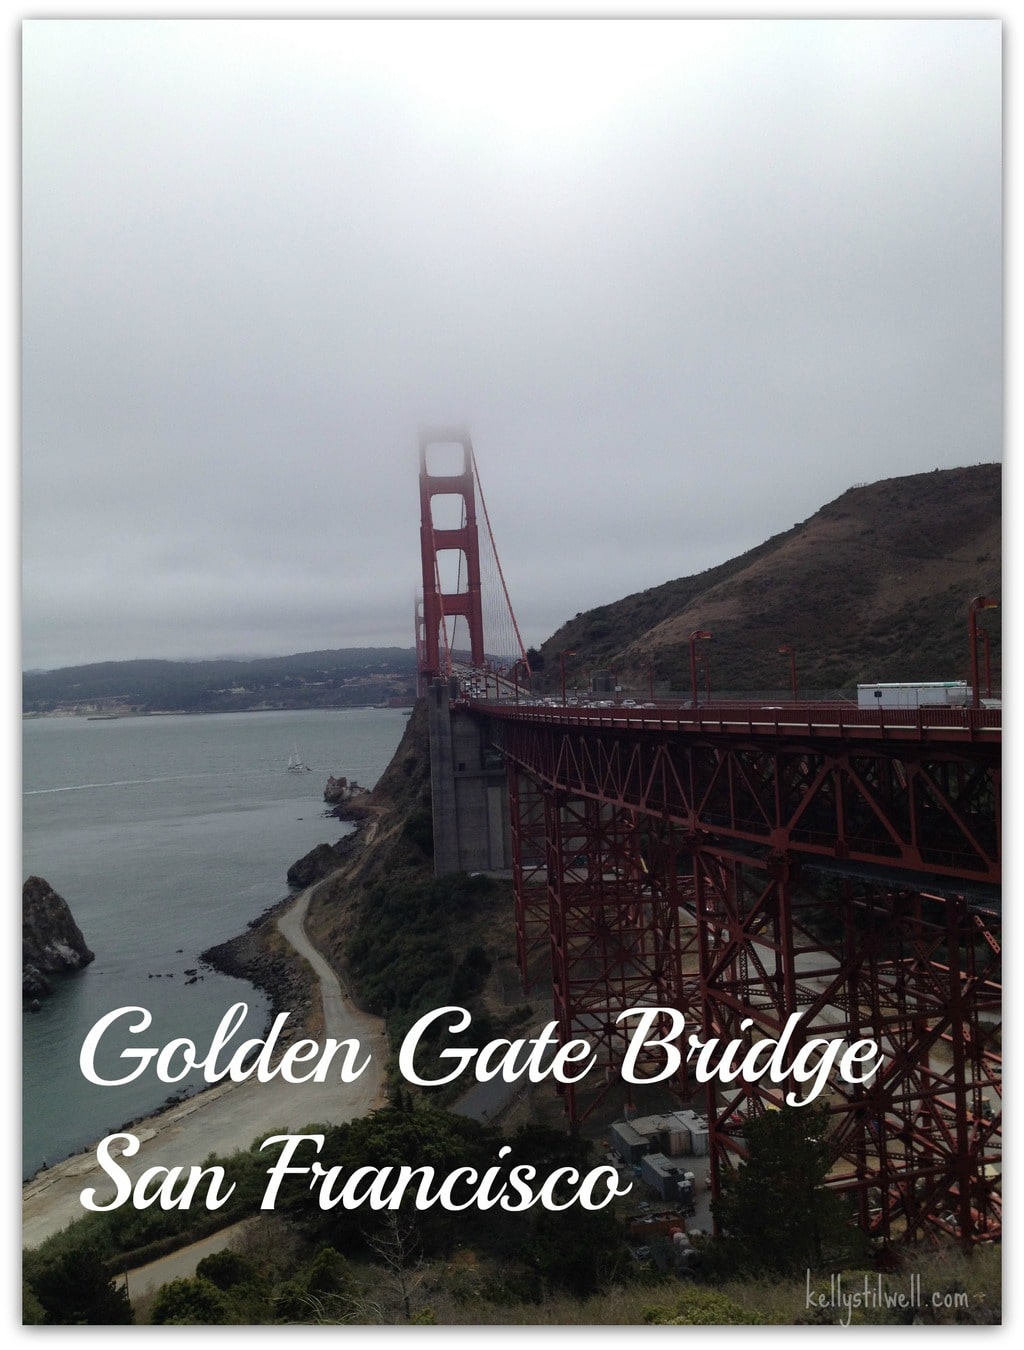 A few years ago we decided to take a California road trip with our girls. I love to travel internationally, but there is something special about a family road trip in the United States. There is so much to see right here in our beautiful country! Cool to see the Golden Gate Bridge.